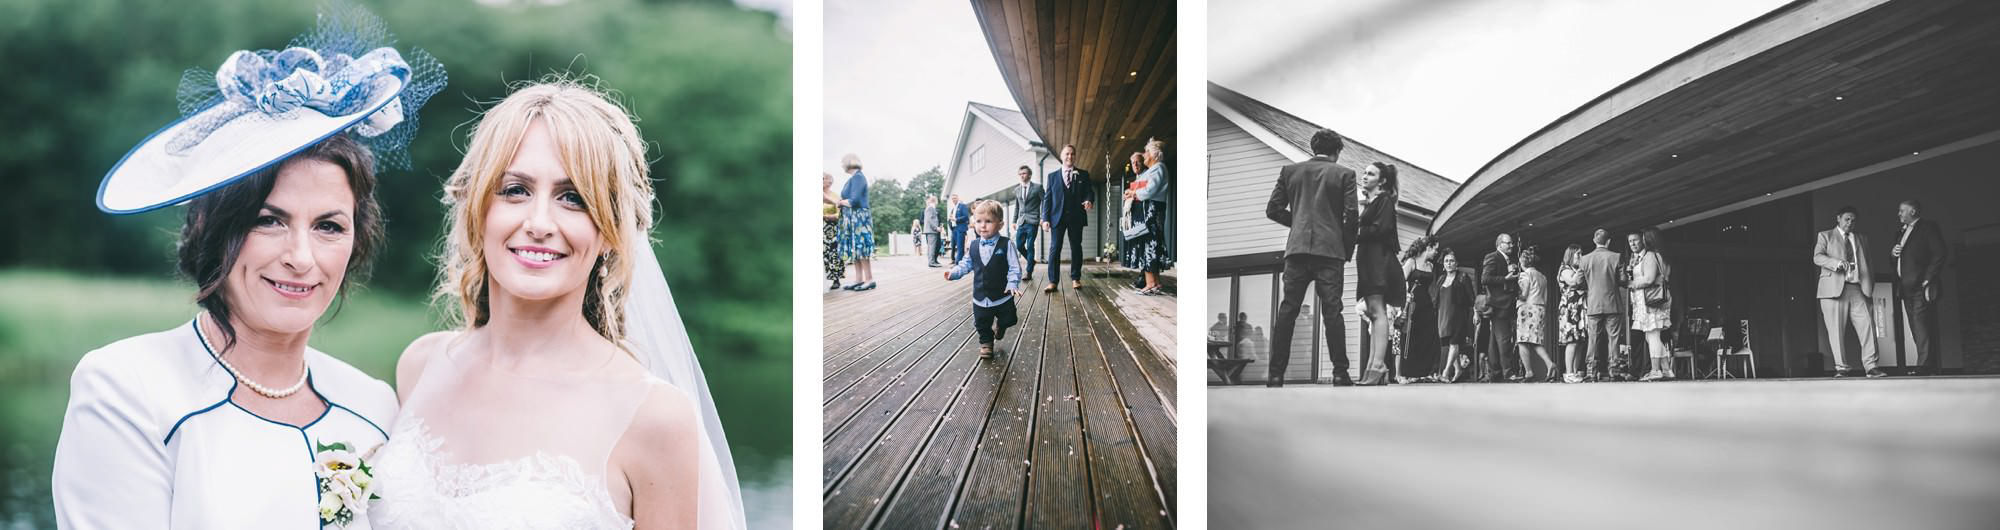 boathouse-wedding-ormesby-broad-by-james-powell-photography-024